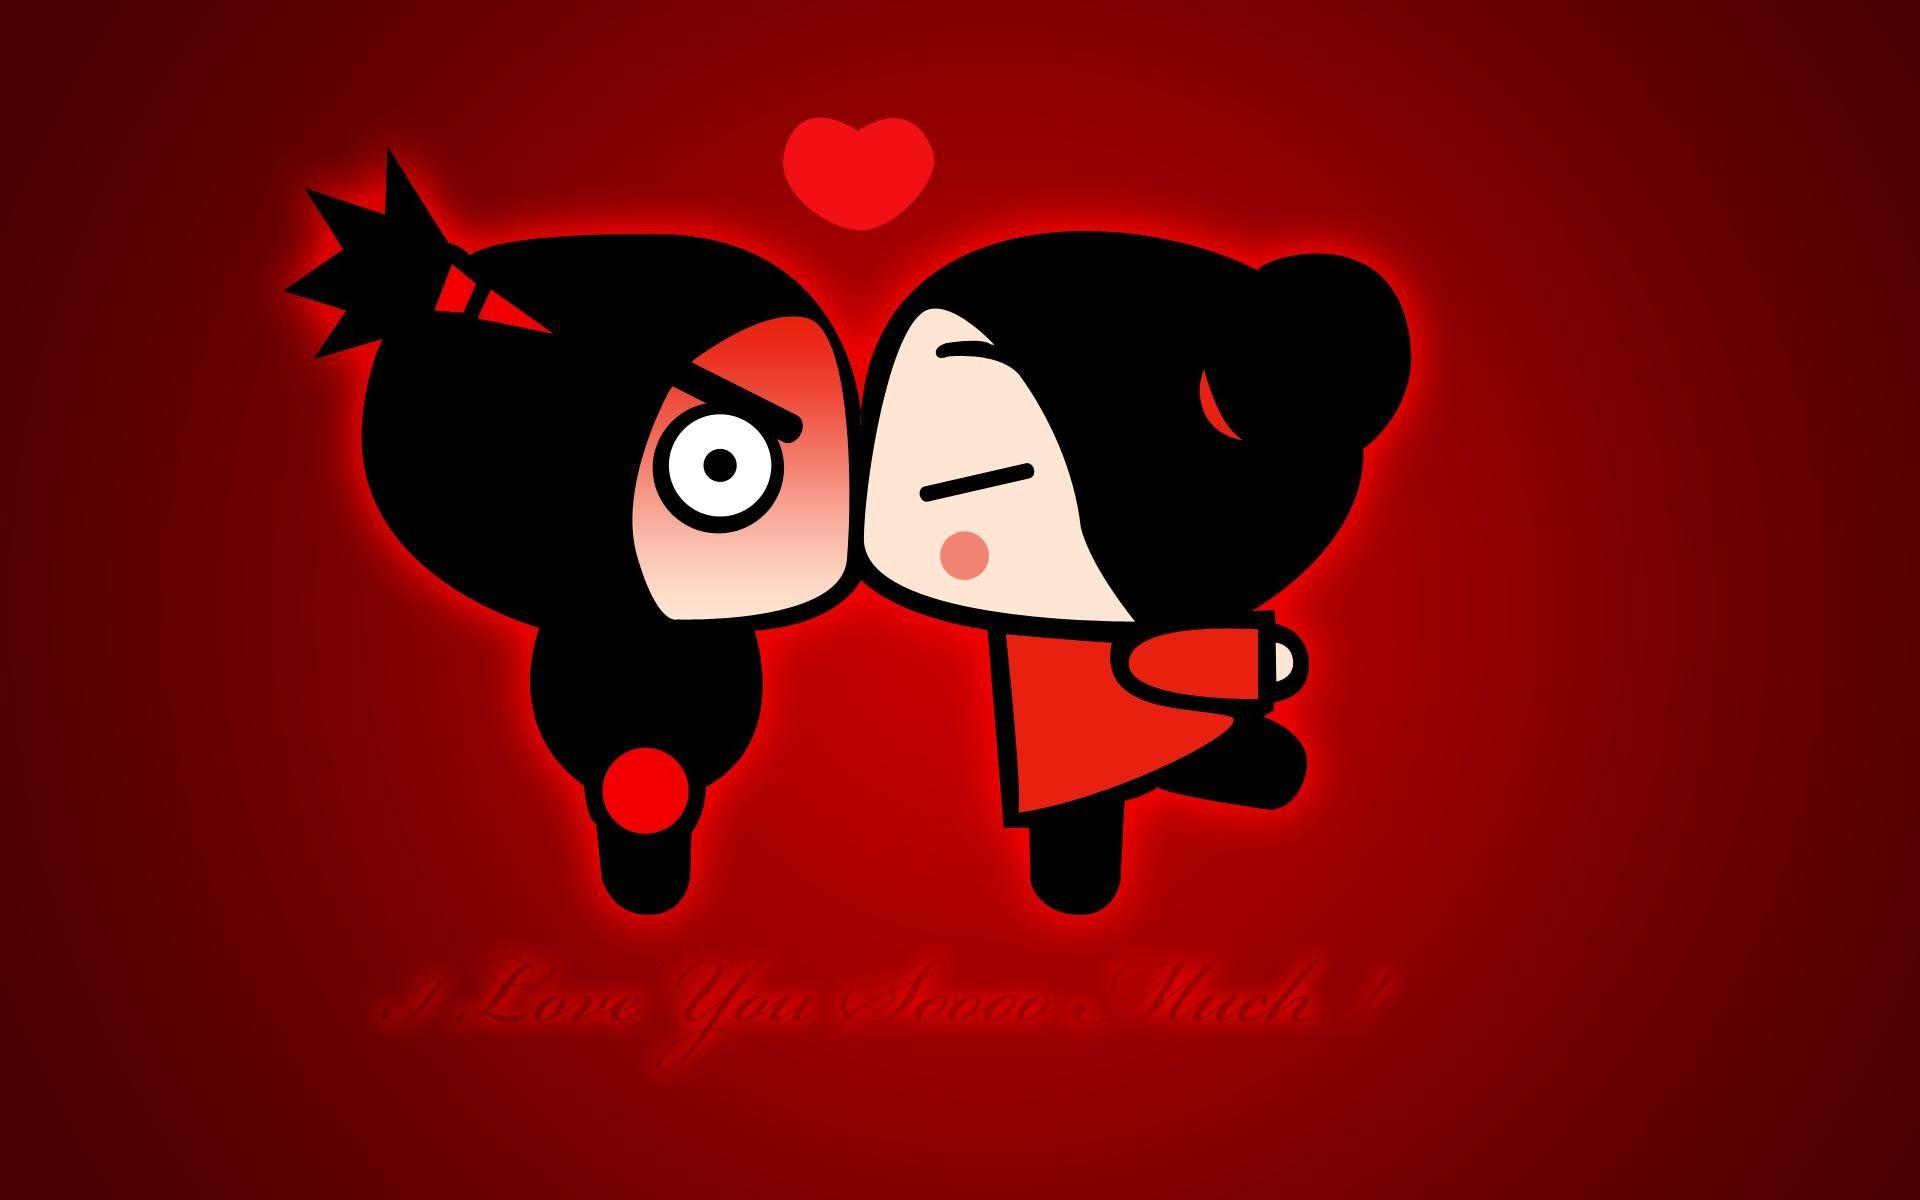 Of pucca pictures Facebook pucca